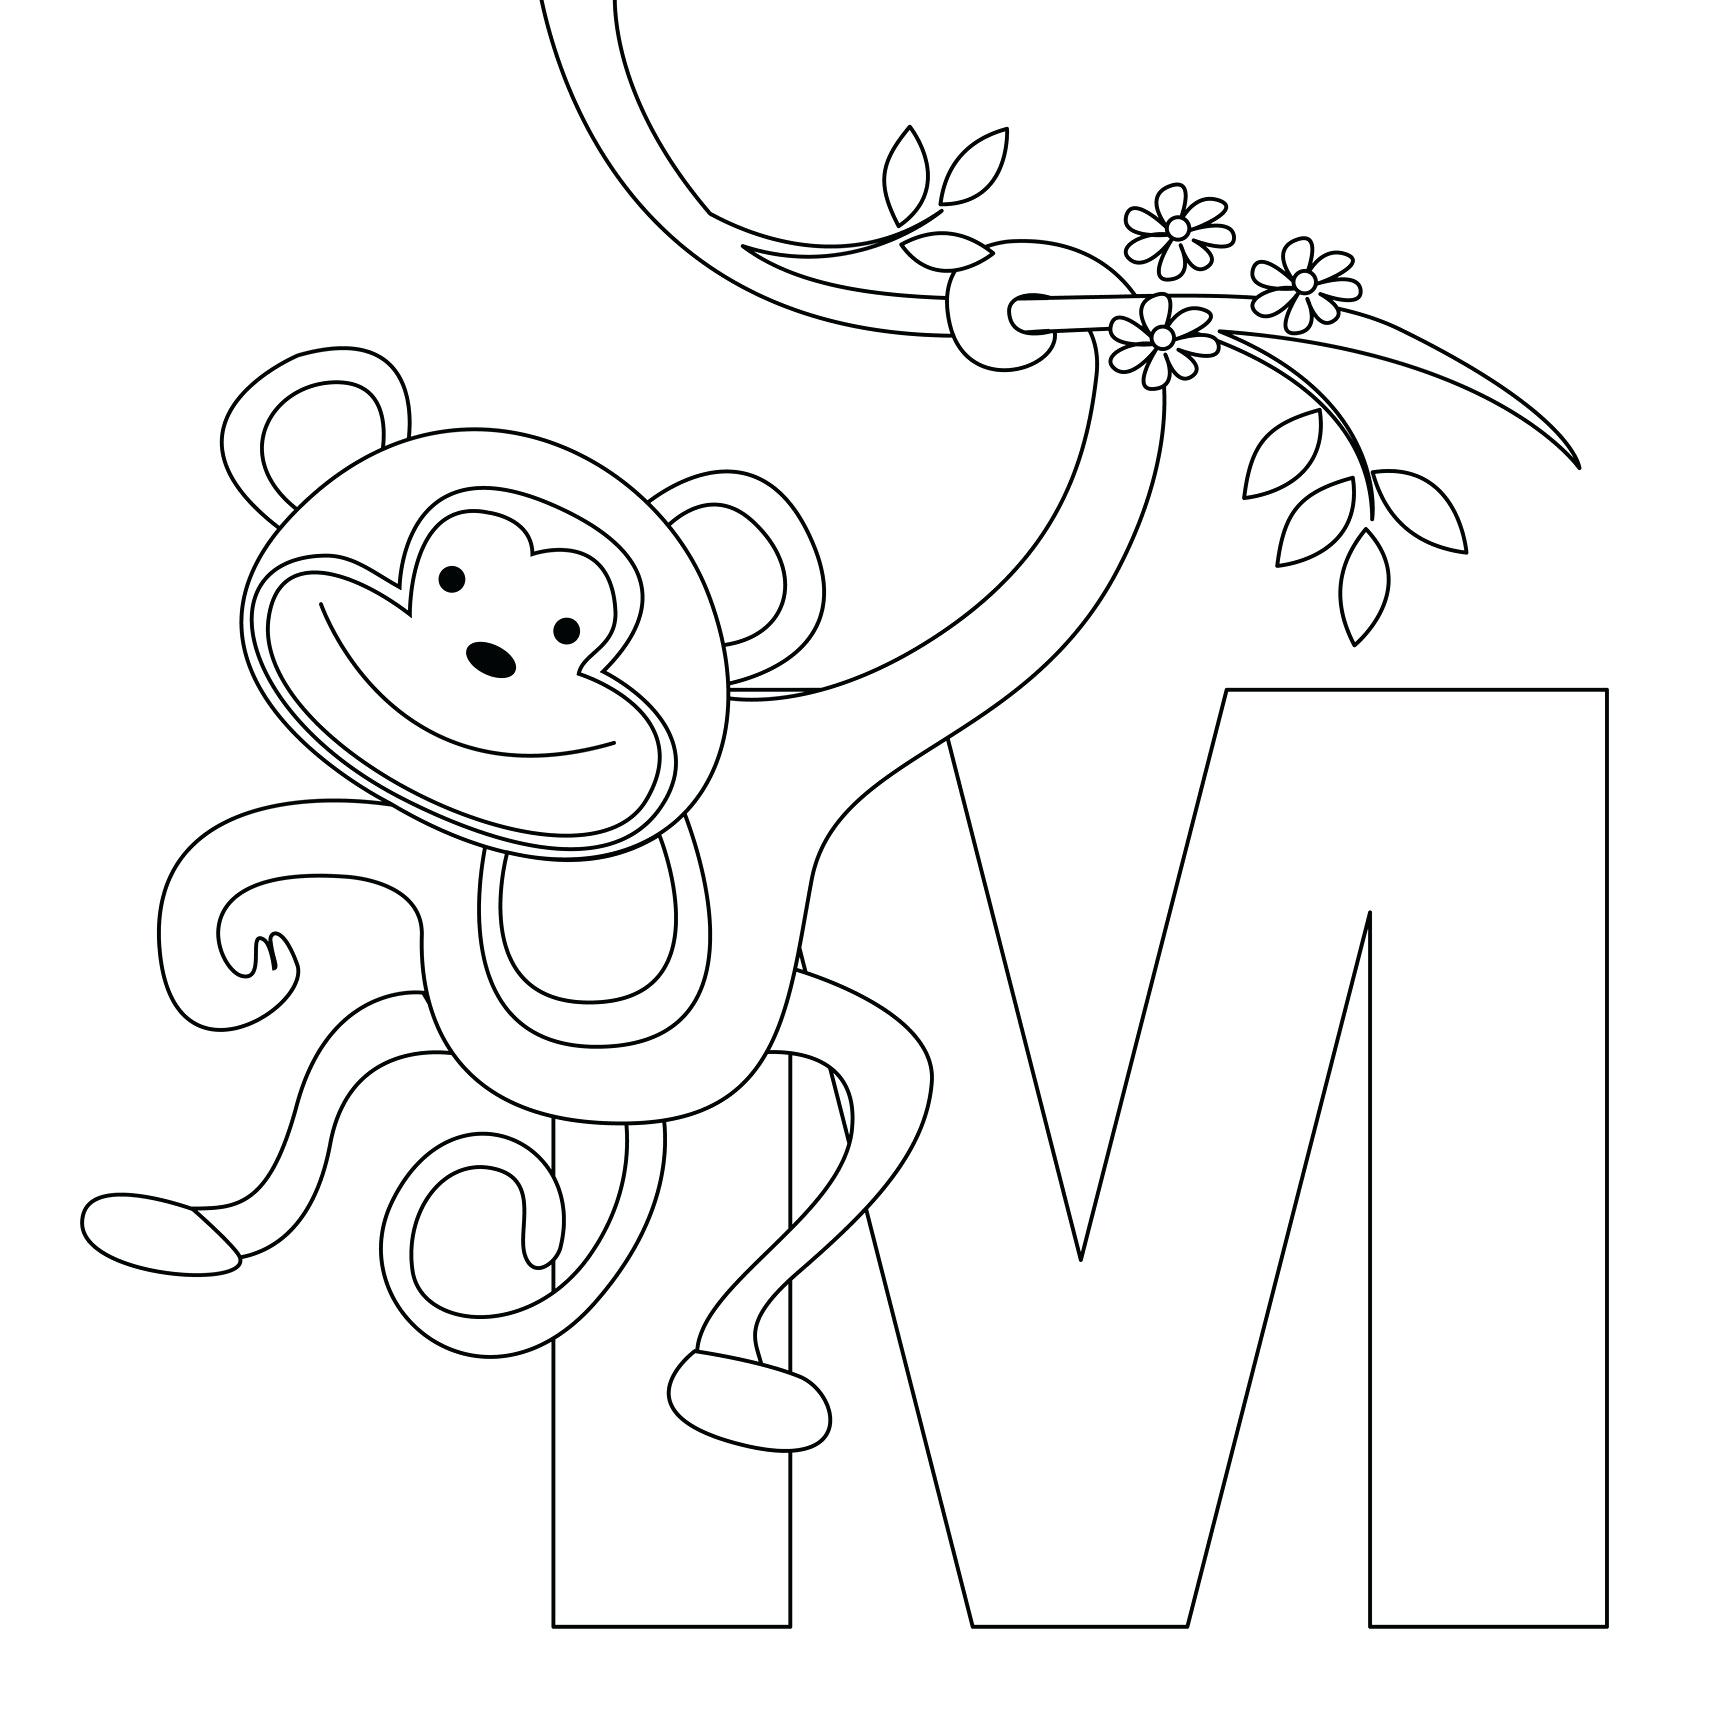 Coloring Pages : Number Christmasring Pages Free Alphabet ...